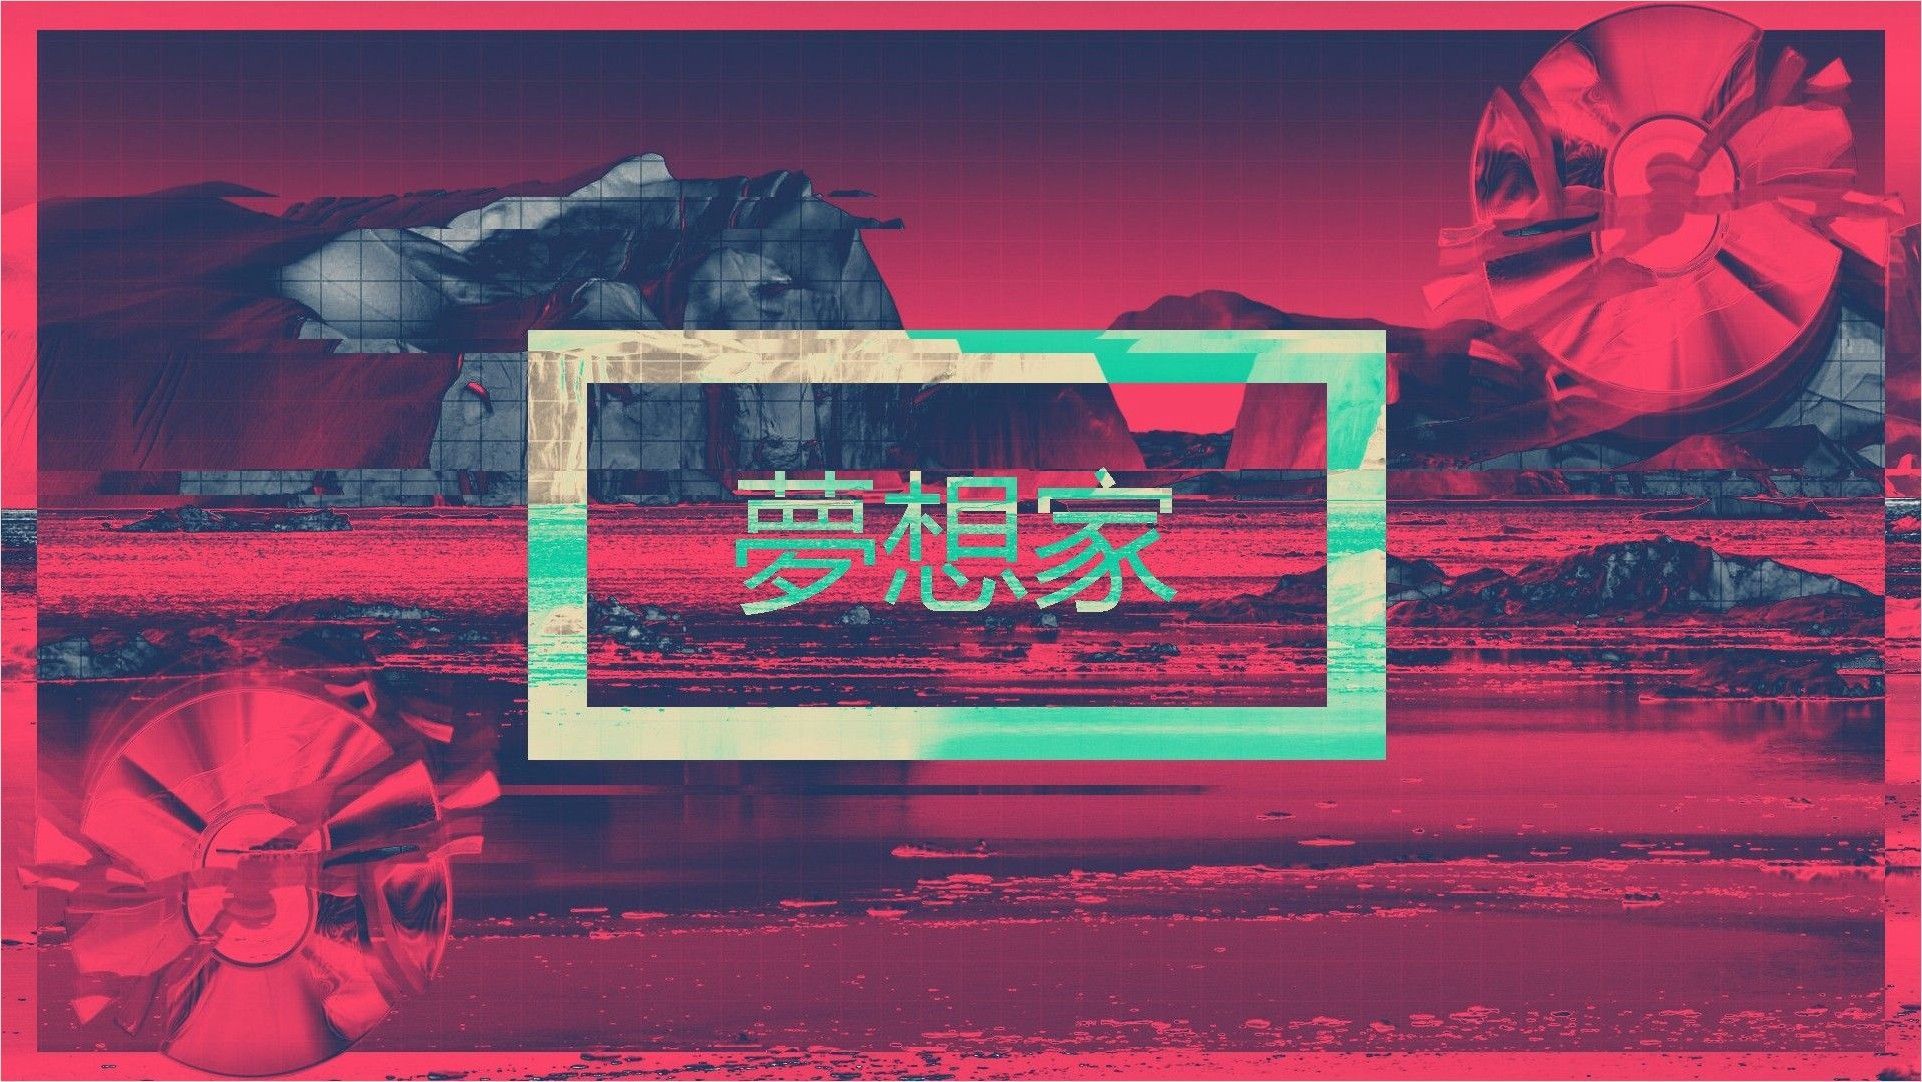 4K Vaporwave Wallpaper HD:Amazon.com:Appstore for Android